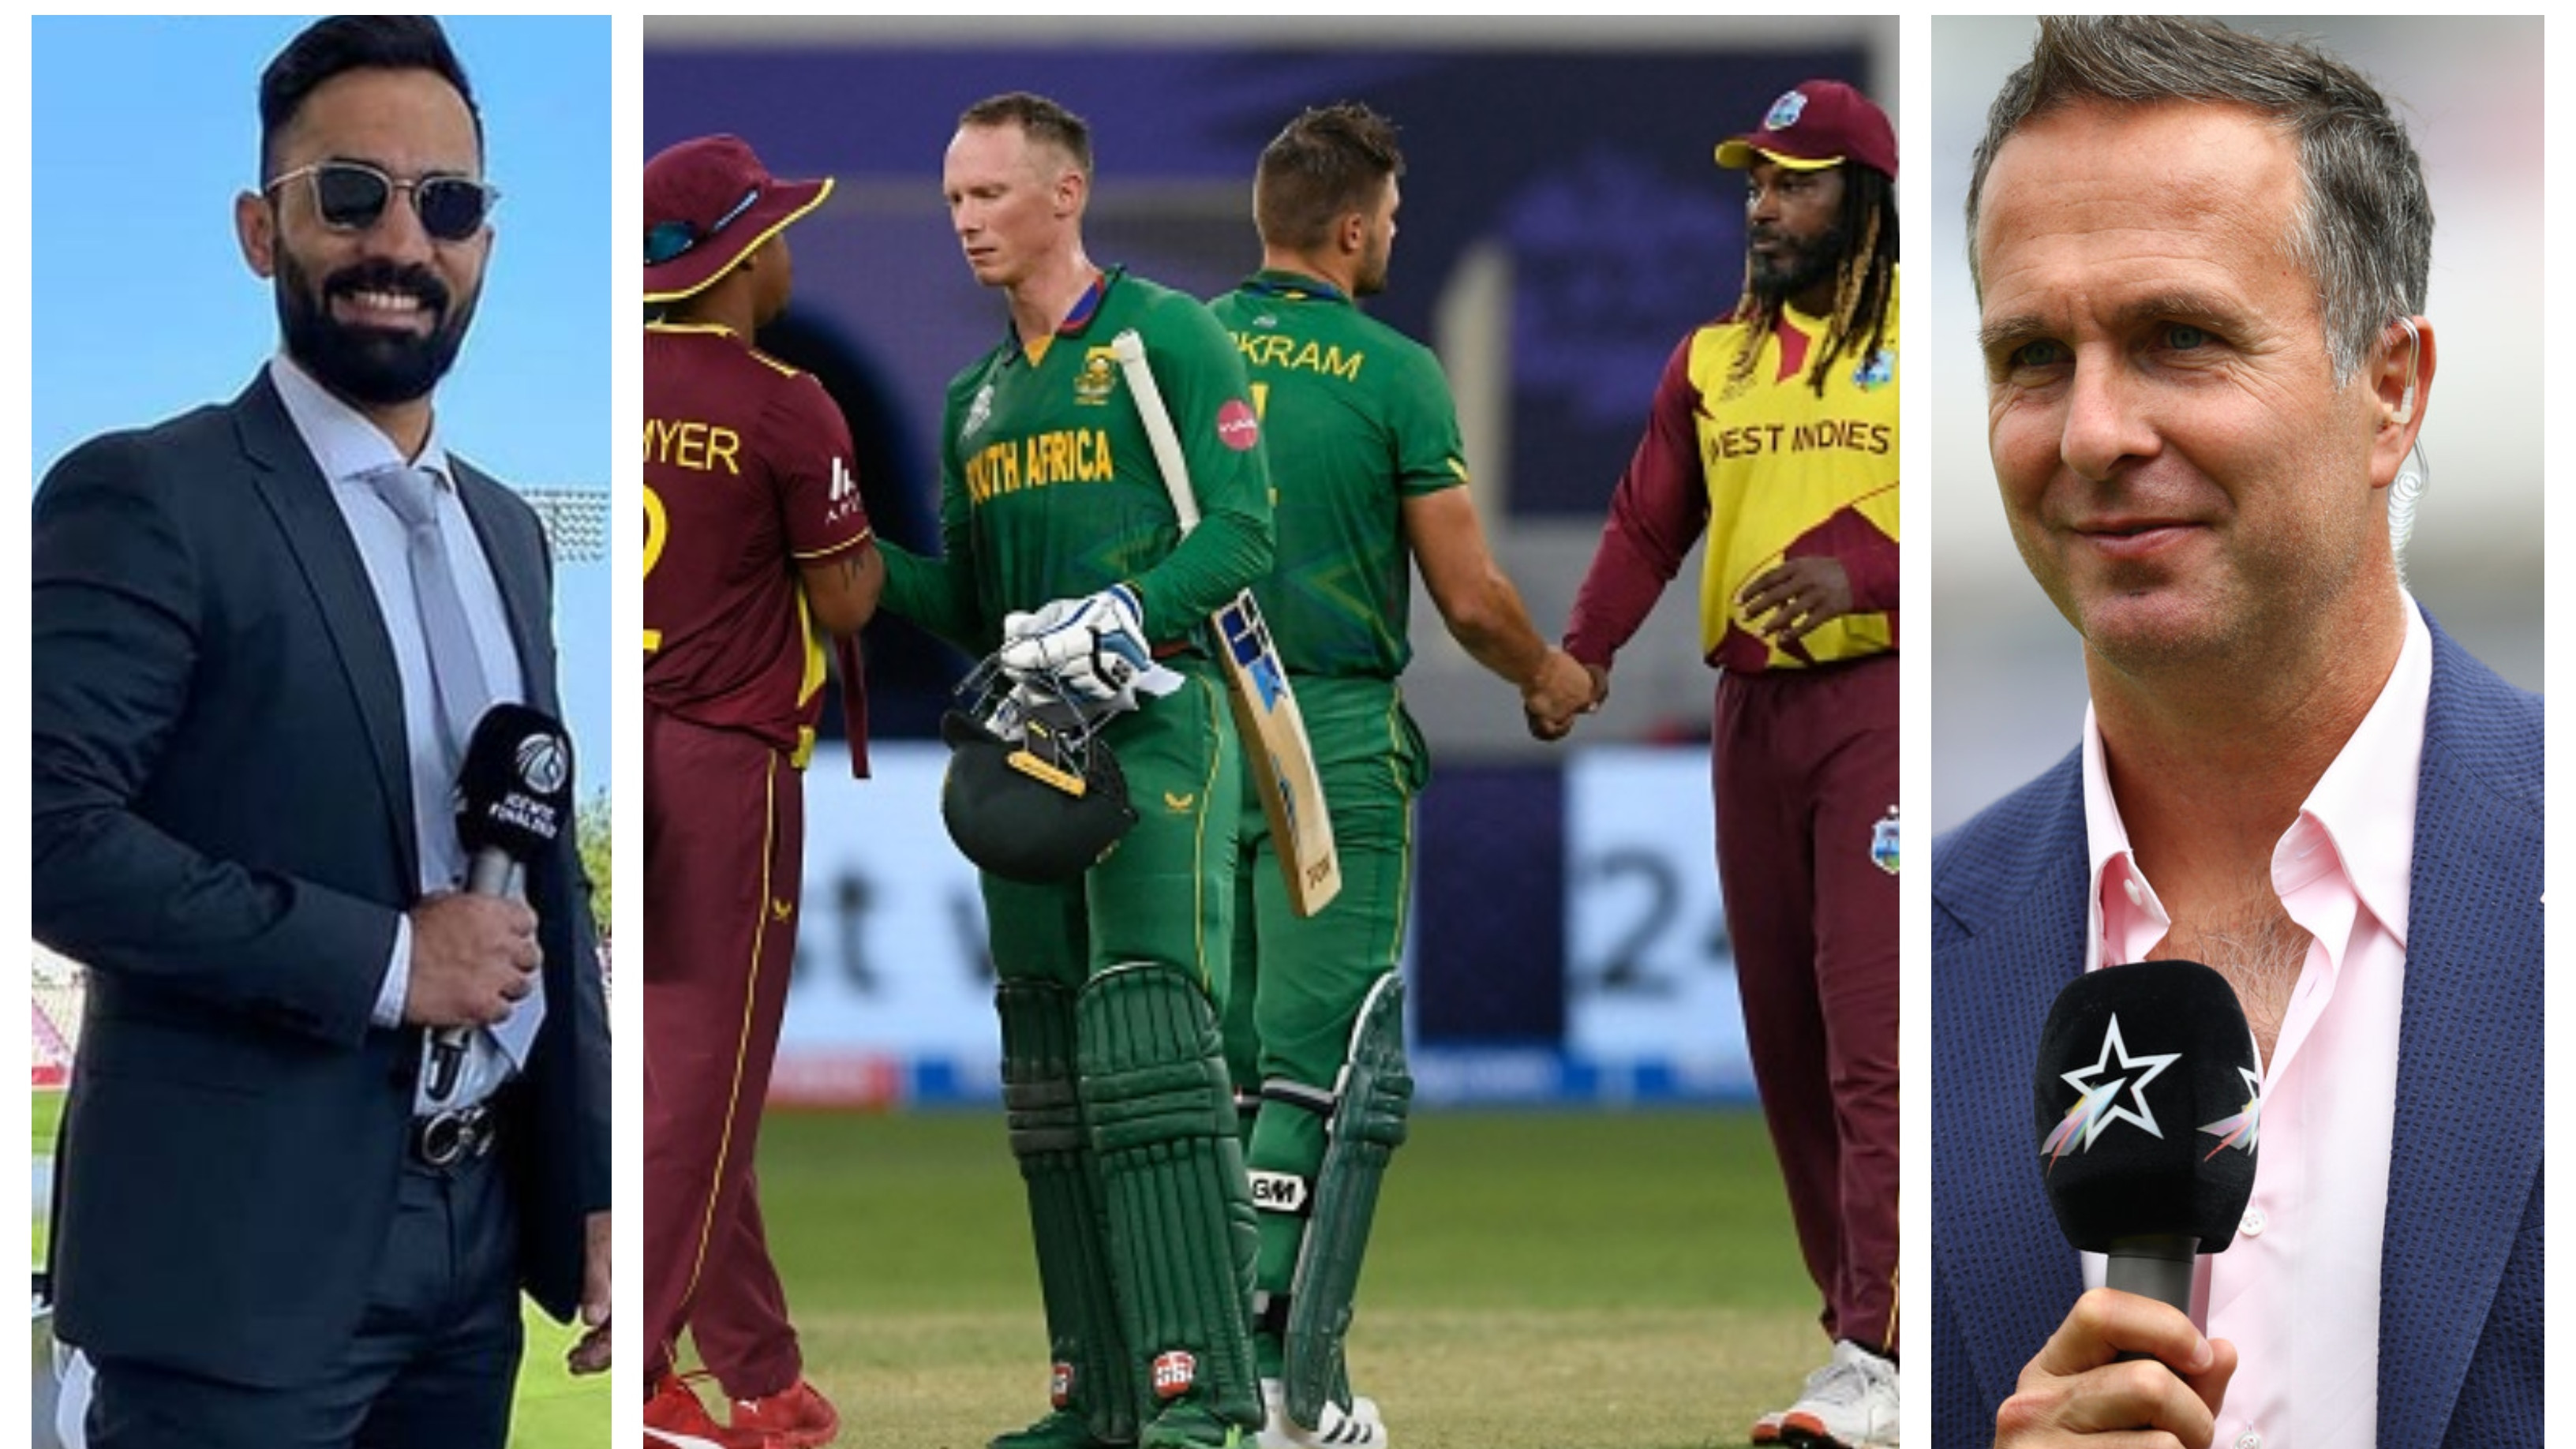 T20 World Cup 2021: Cricket fraternity reacts to South Africa’s dominating 8-wicket win over West Indies